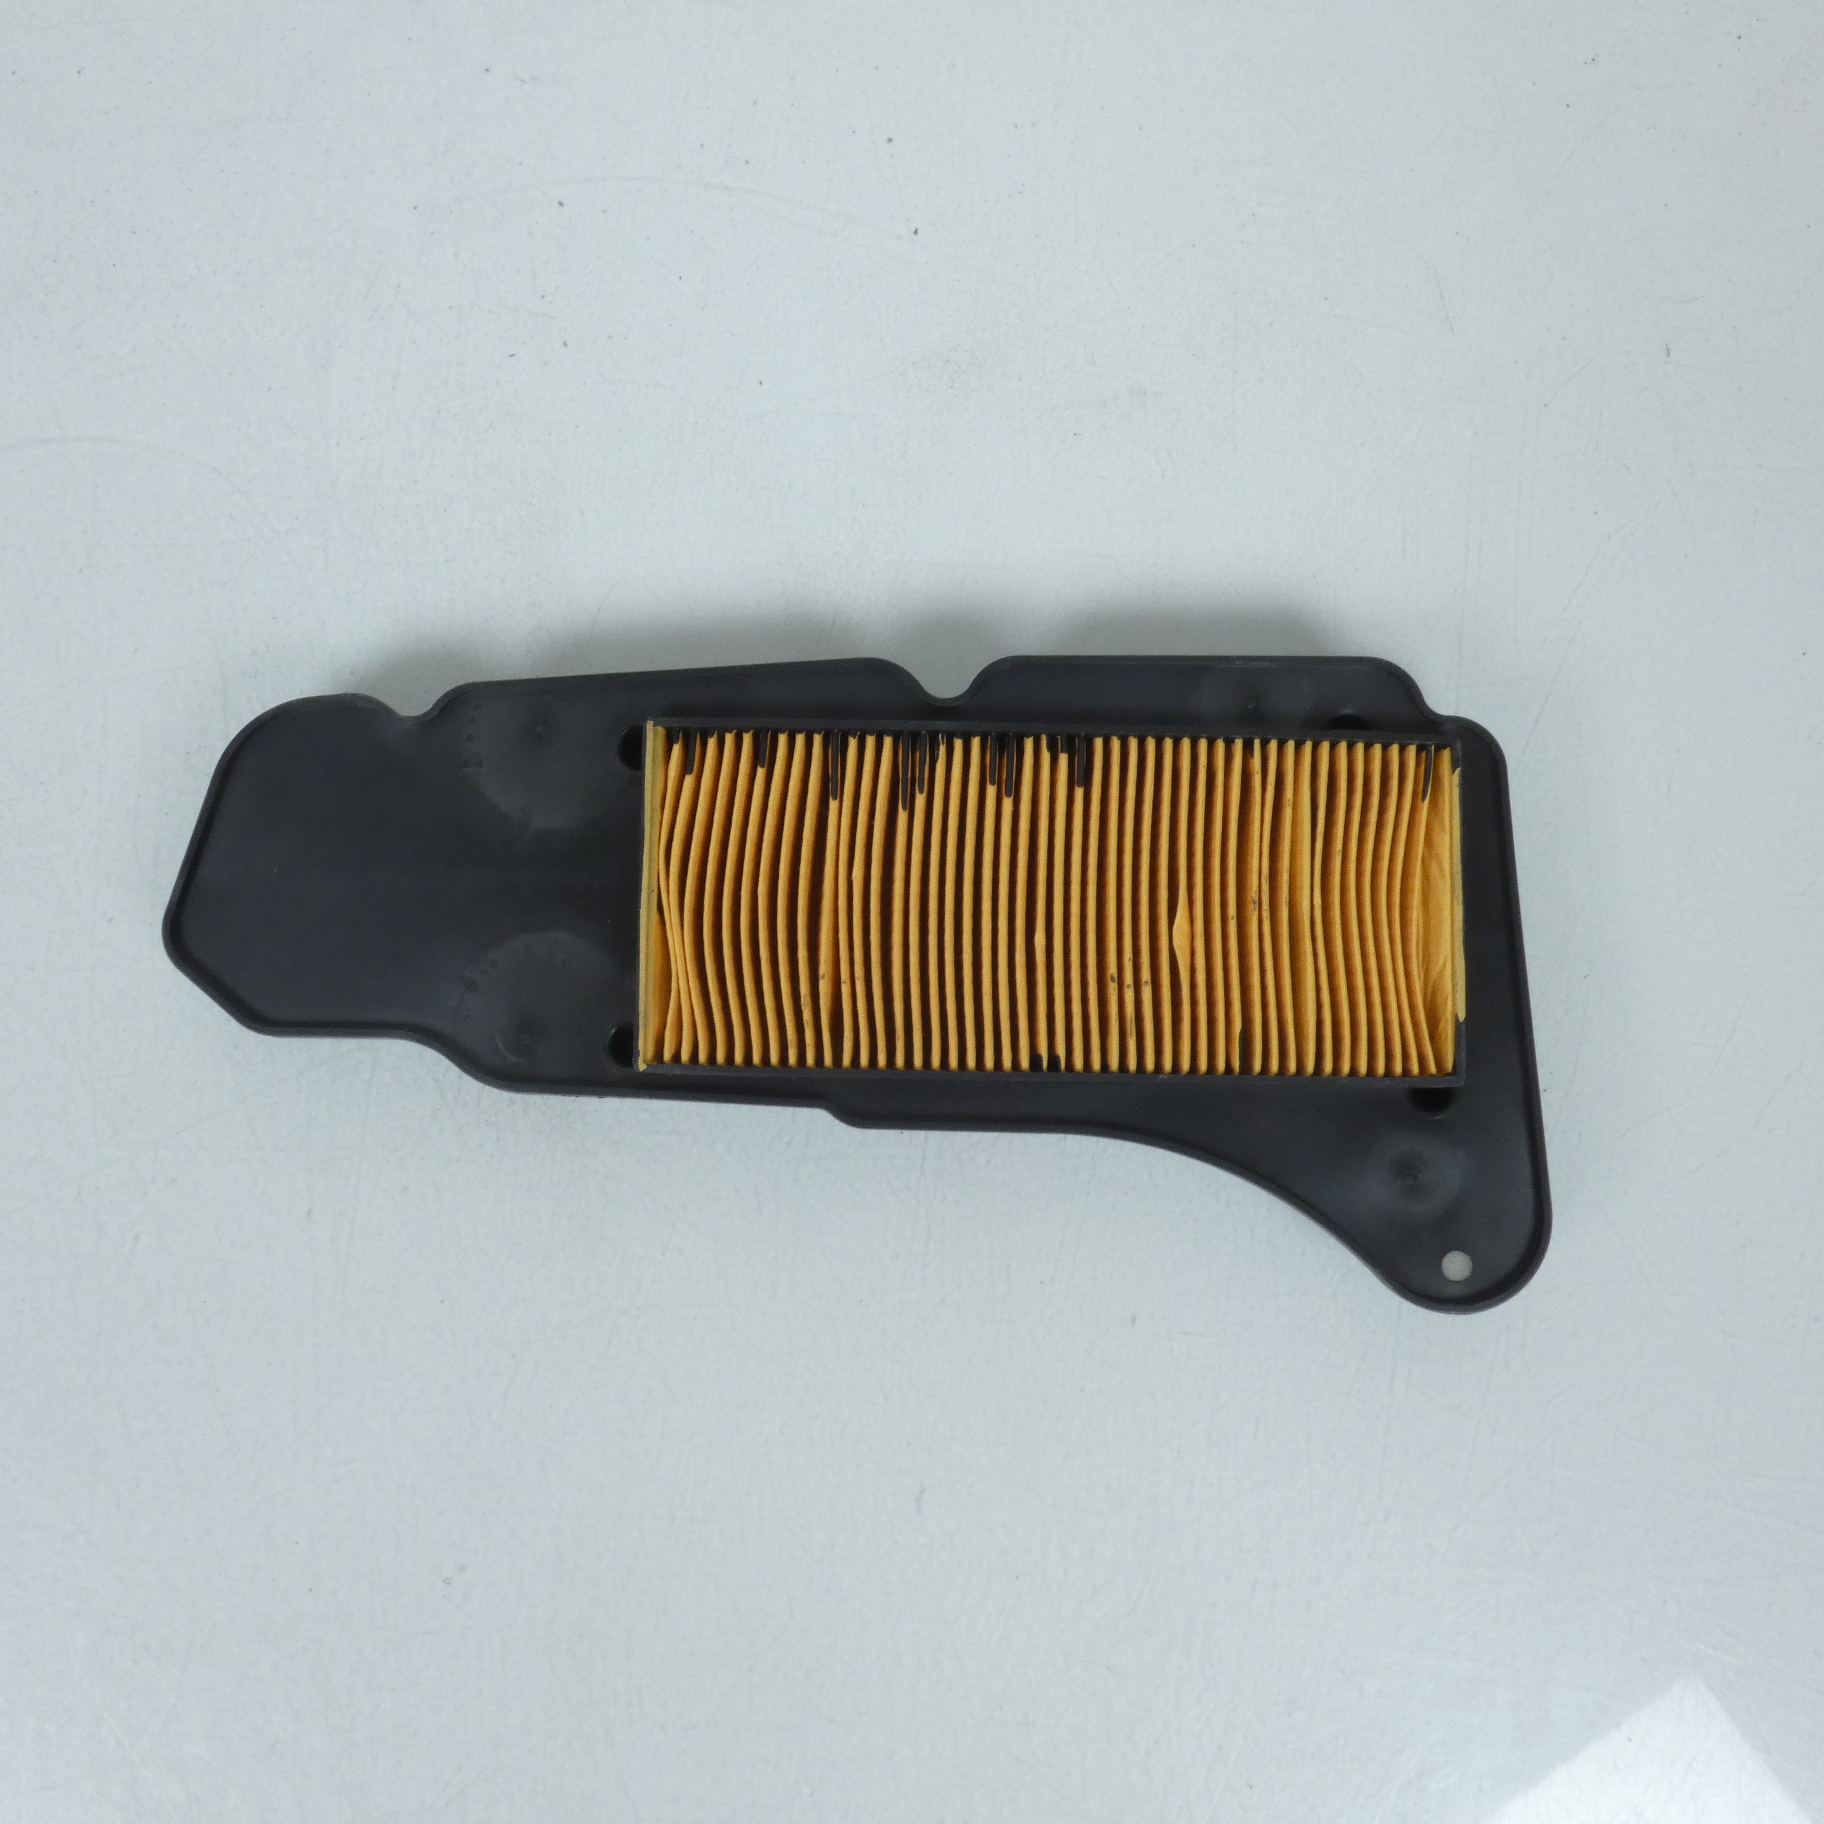 Filtre à air Nypso pour scooter Yamaha 400 5RU144513000 Neuf